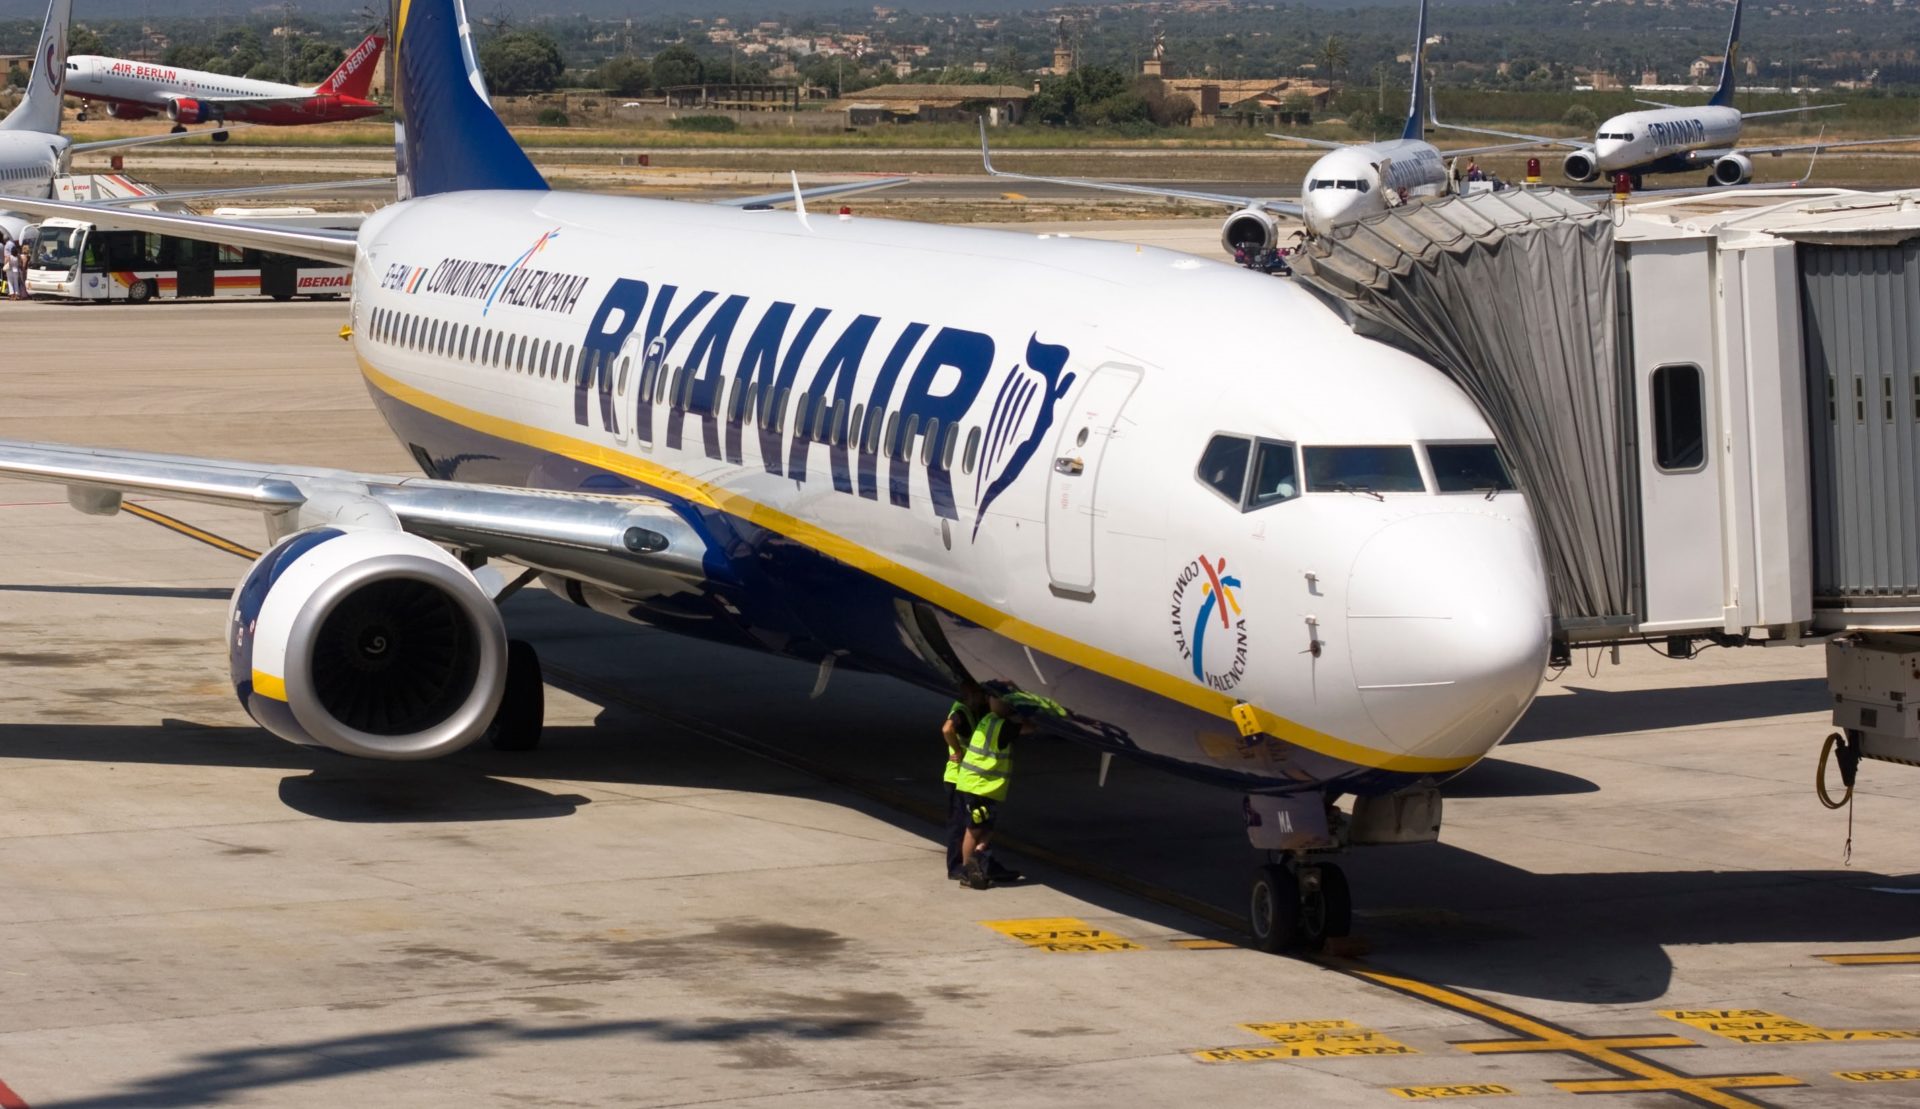 A Ryanair plane, known for its cheap flights, on an airway